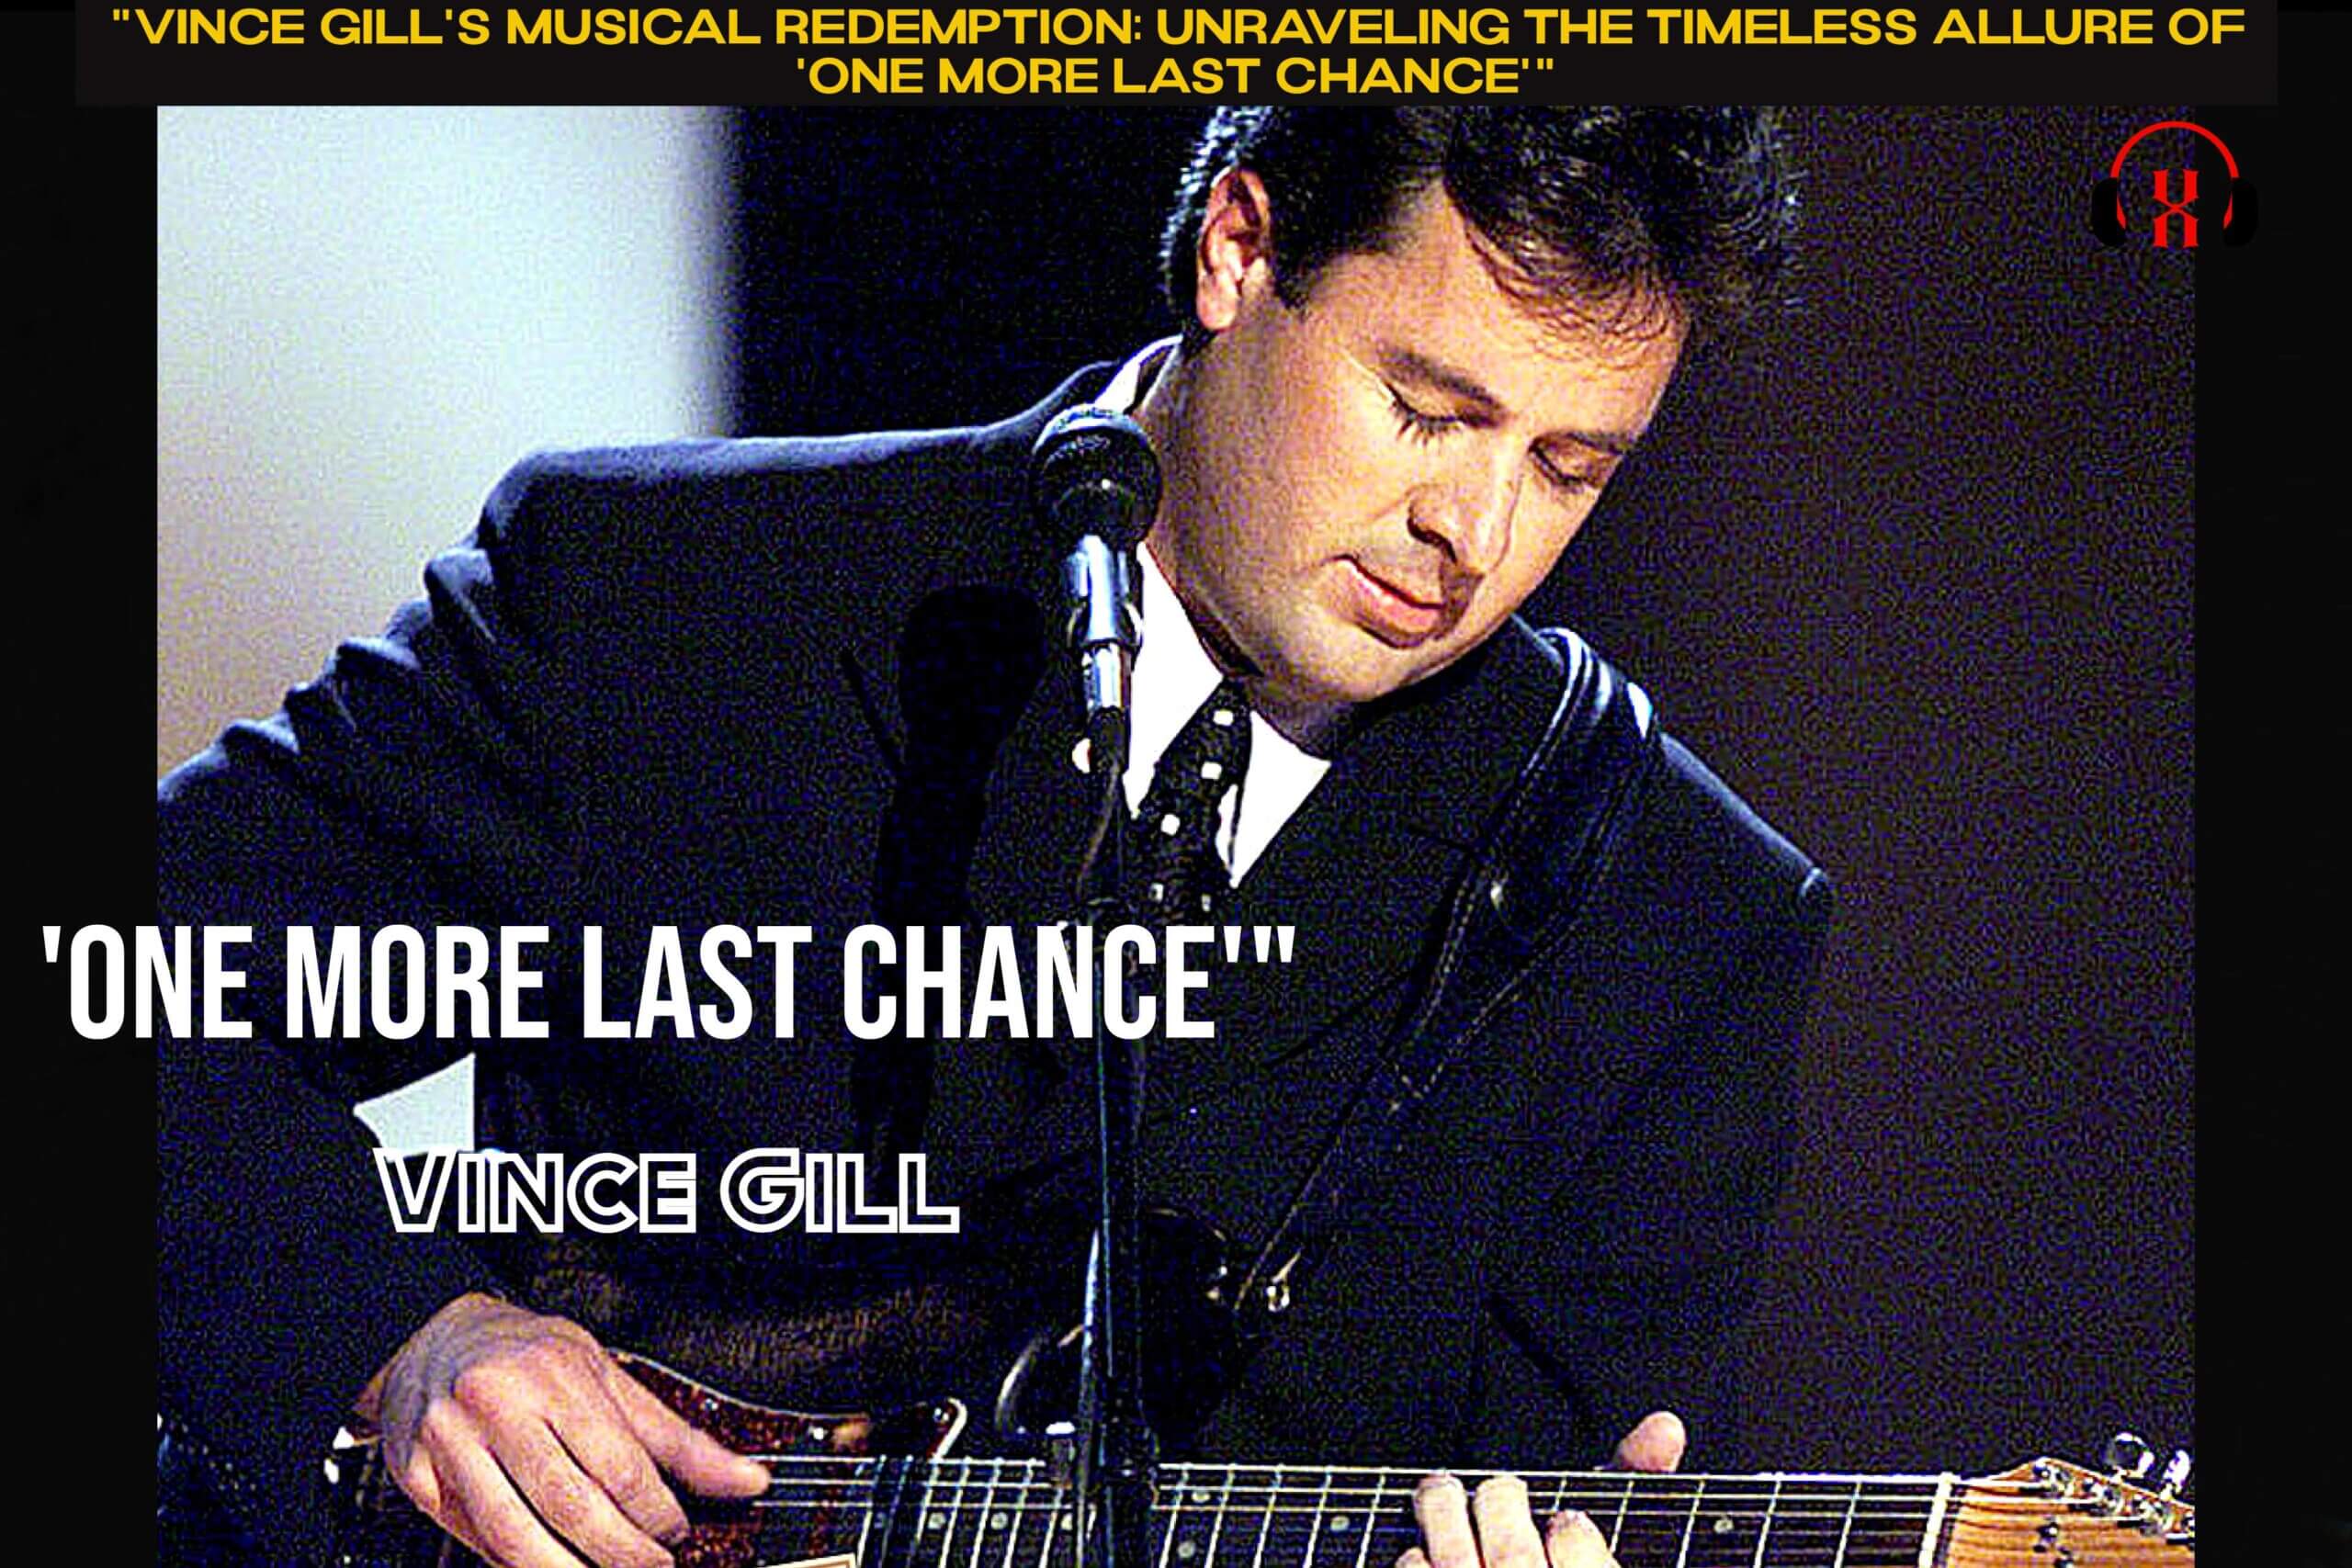 “Vince Gill’s Musical Redemption: Unraveling the Timeless Allure of ‘One More Last Chance'”